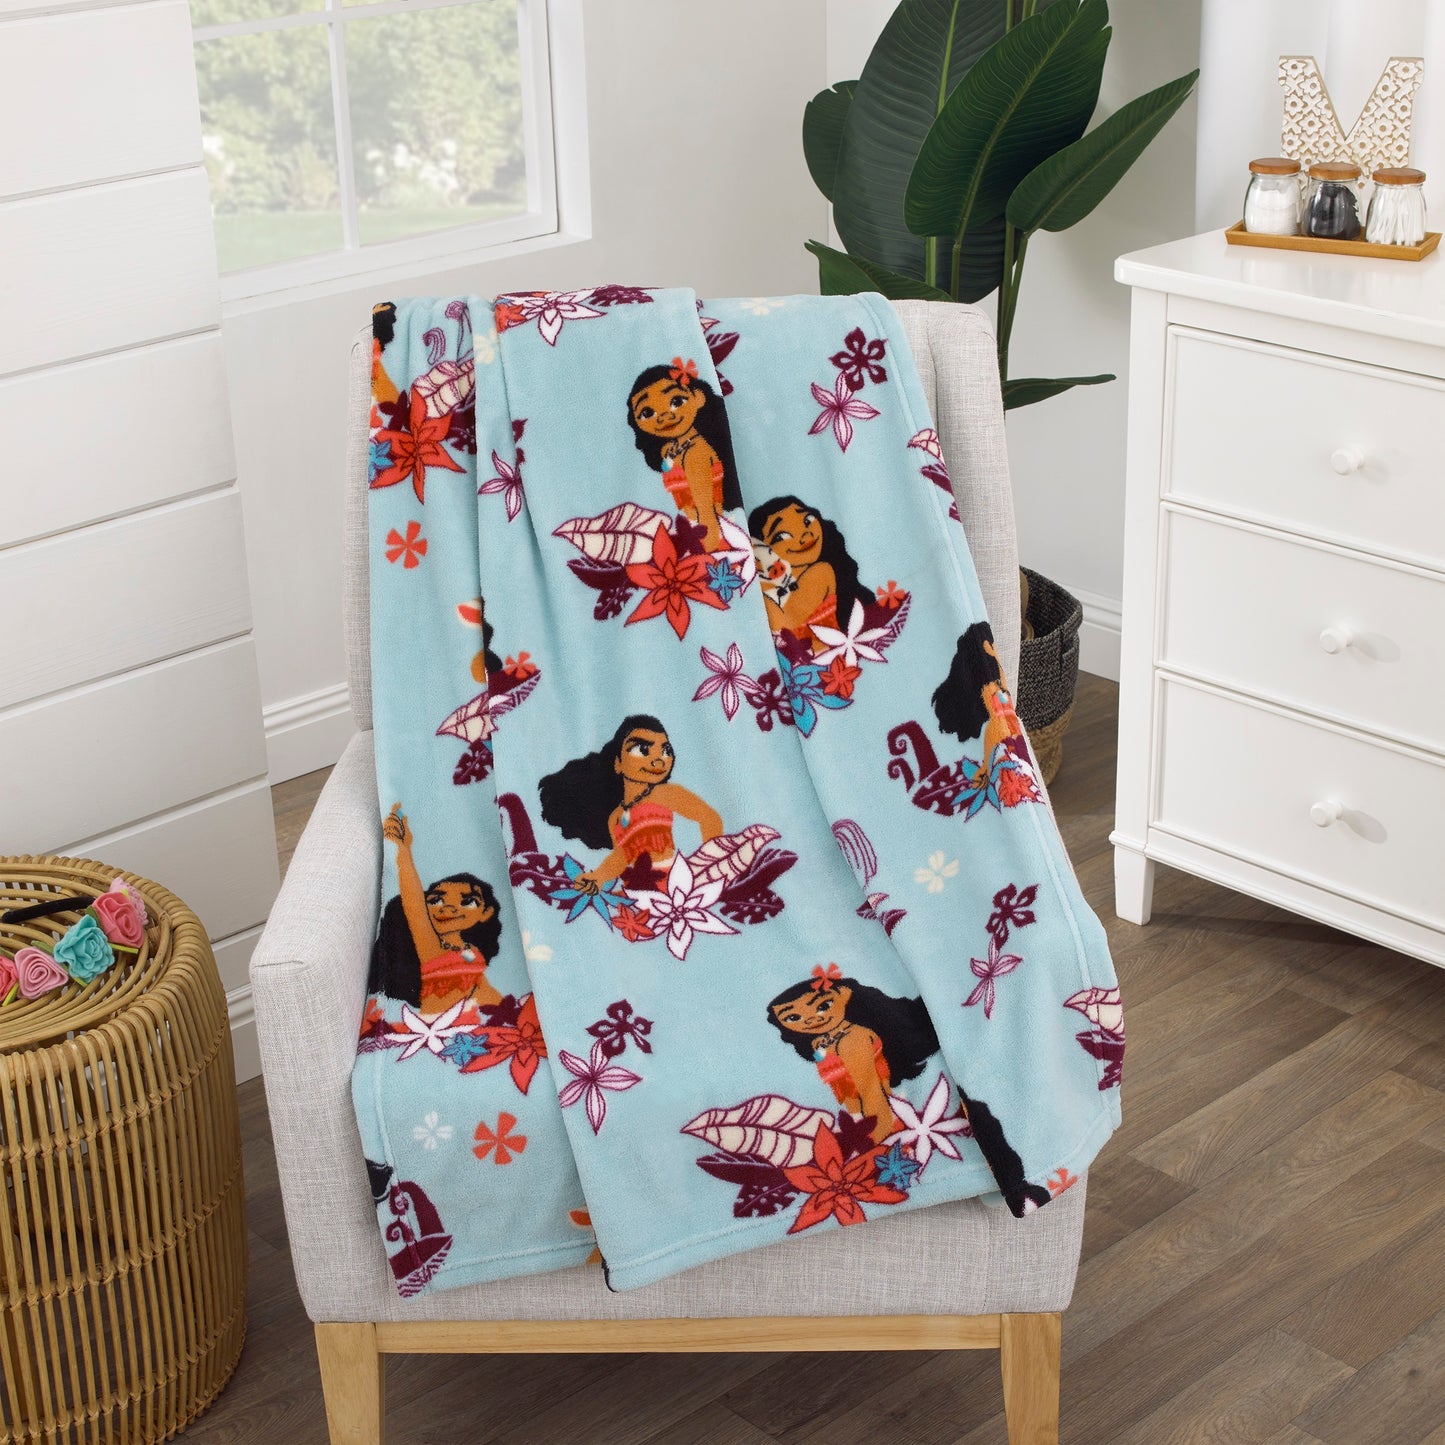 Disney Moana Feel The Waves Aqua, Coral and Violet with Pua Pig and Tropical Flowers Super Soft Toddler Blanket